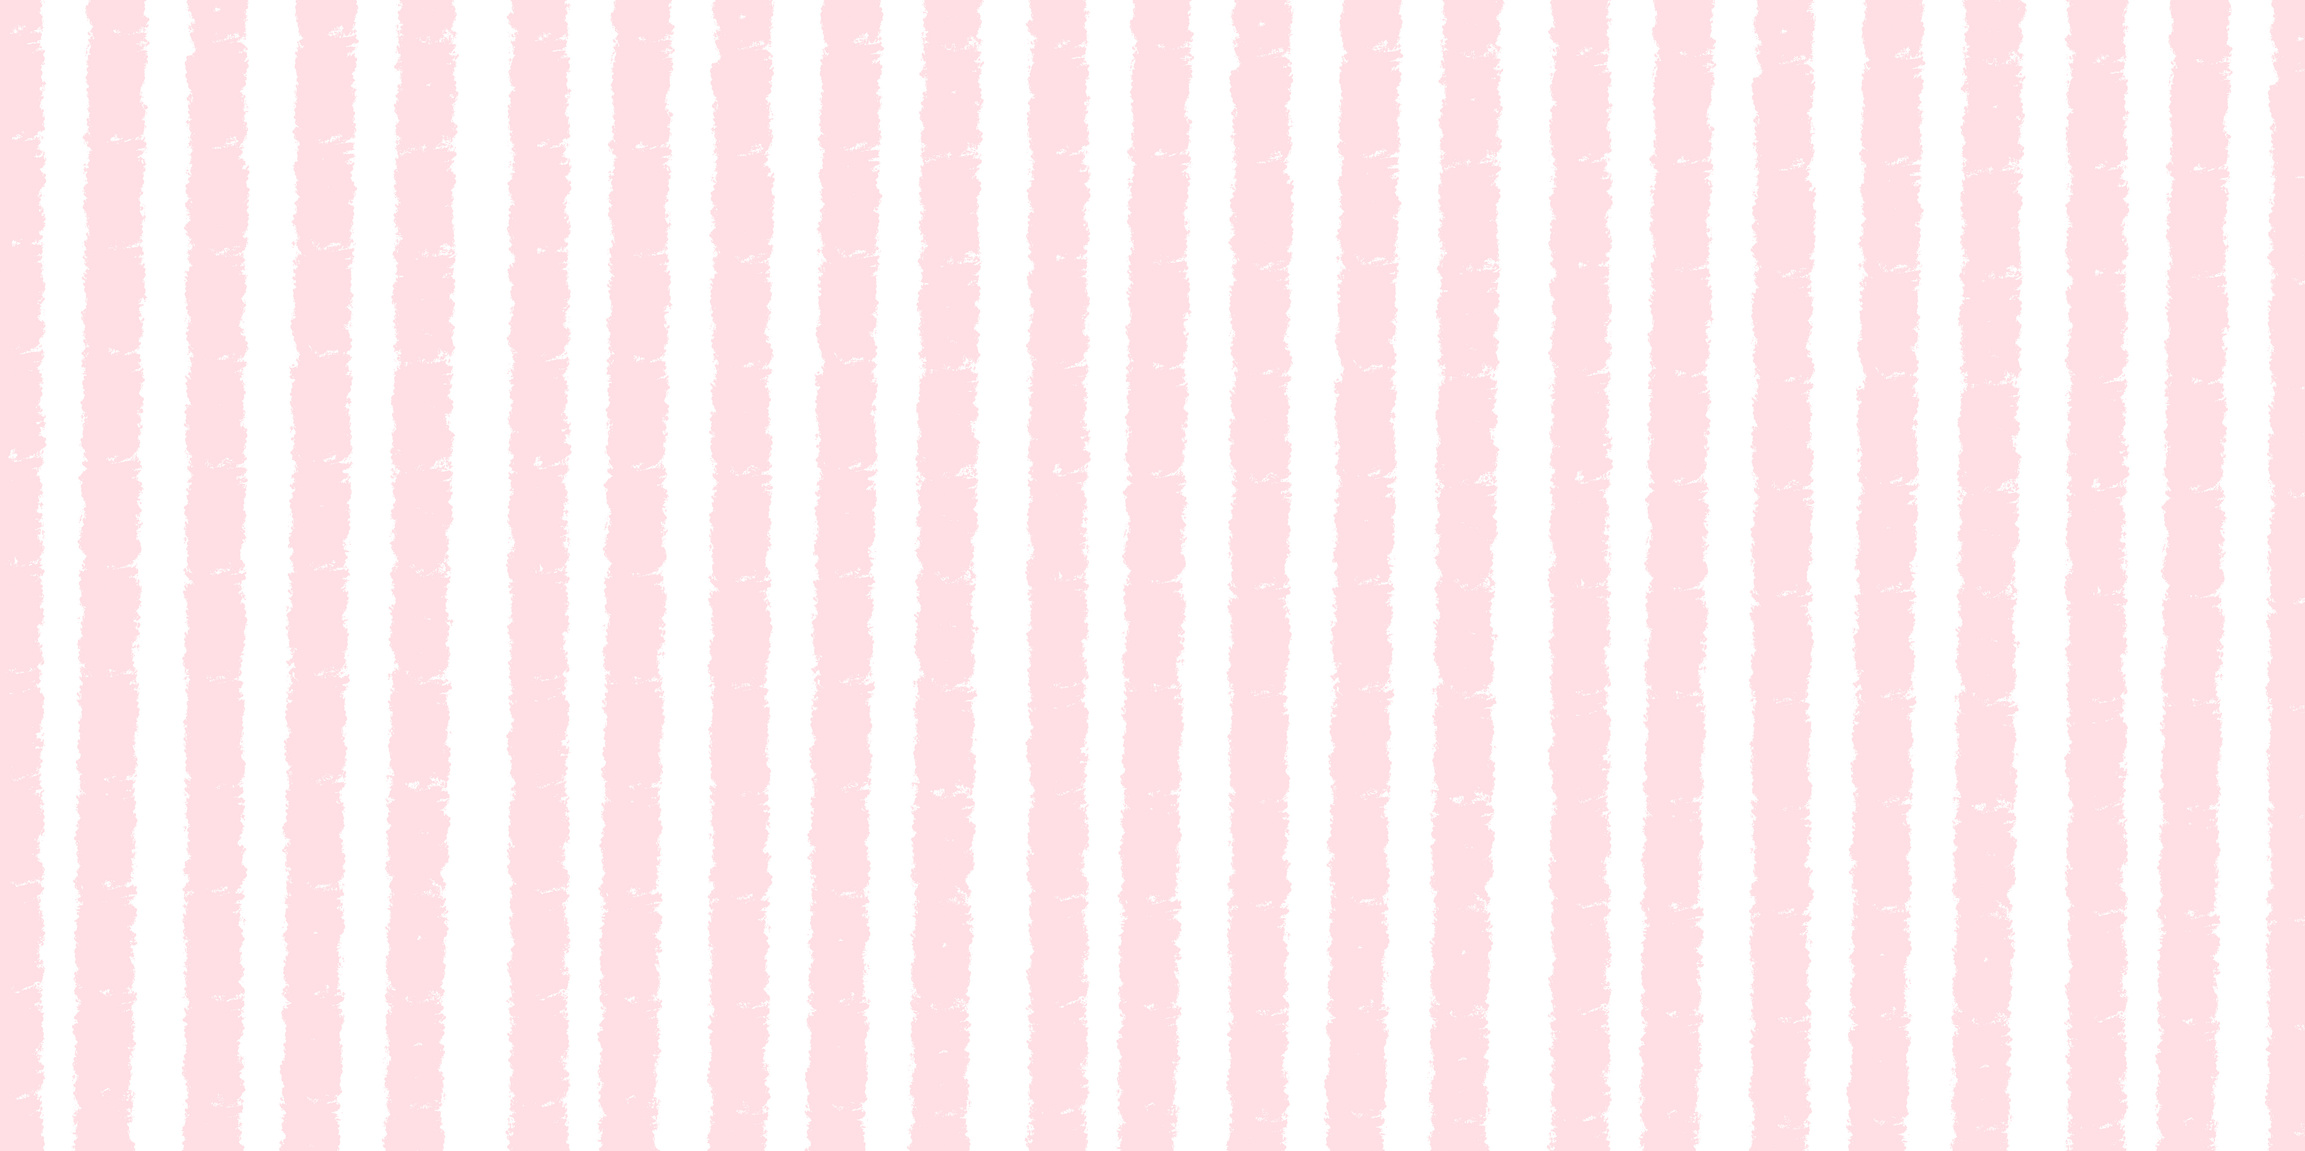 Abstract Pink Stripes Background with Lines